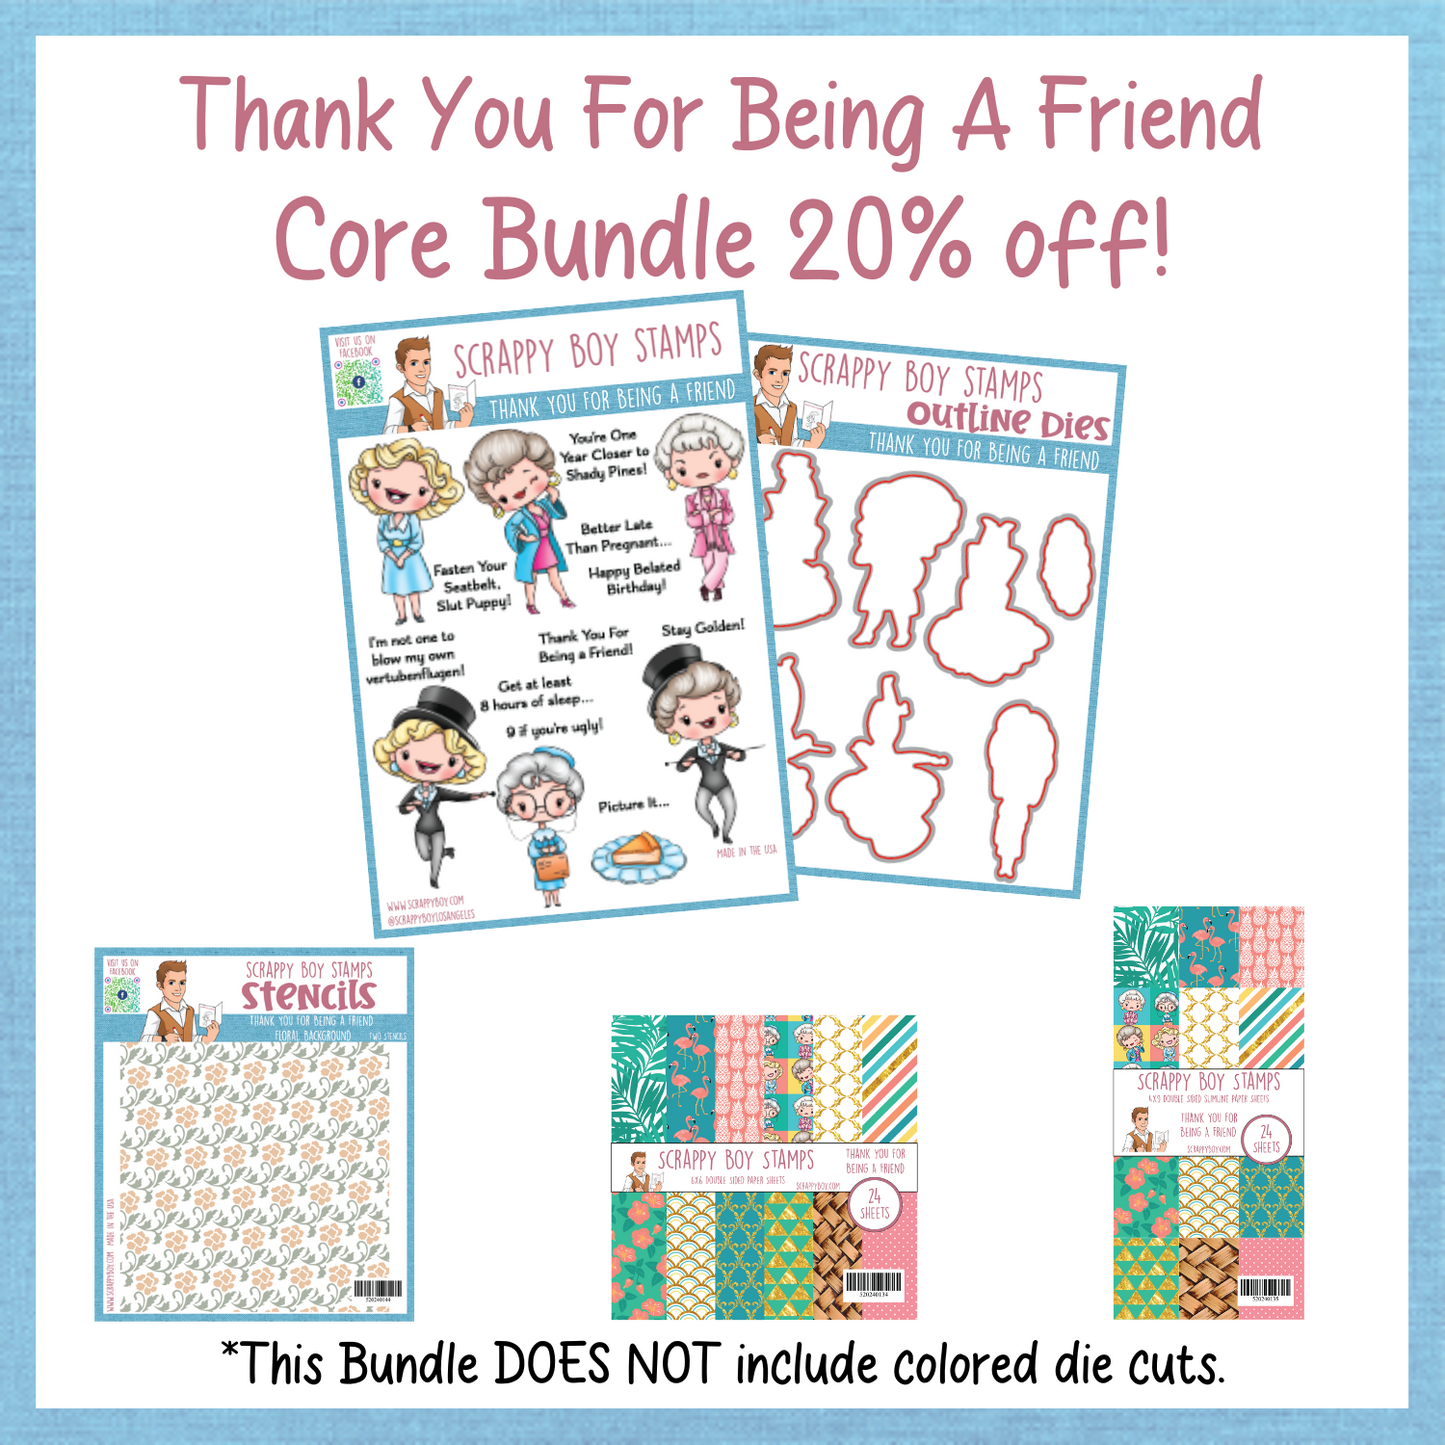 Core Bundle - Thank You For Being A Friend Release Scrappy Boy Stamps